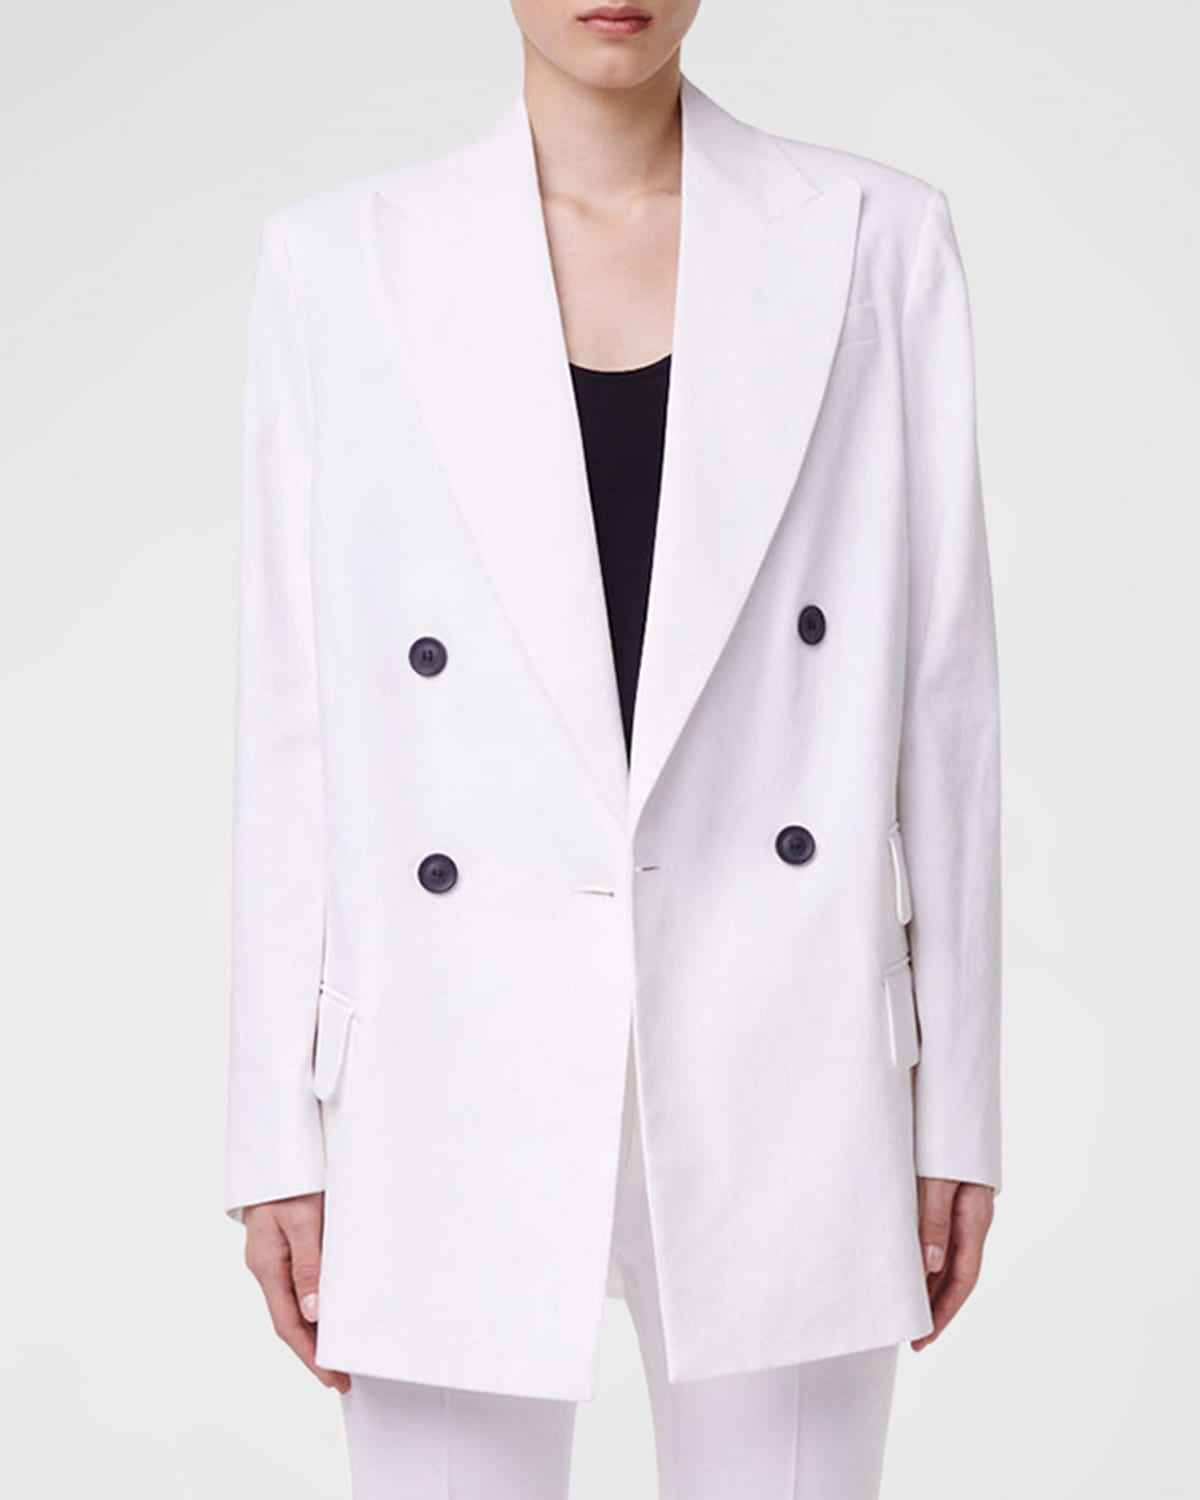 Another Tomorrow Oversize Blazer Jacket With Side Zipper Vents In Off White